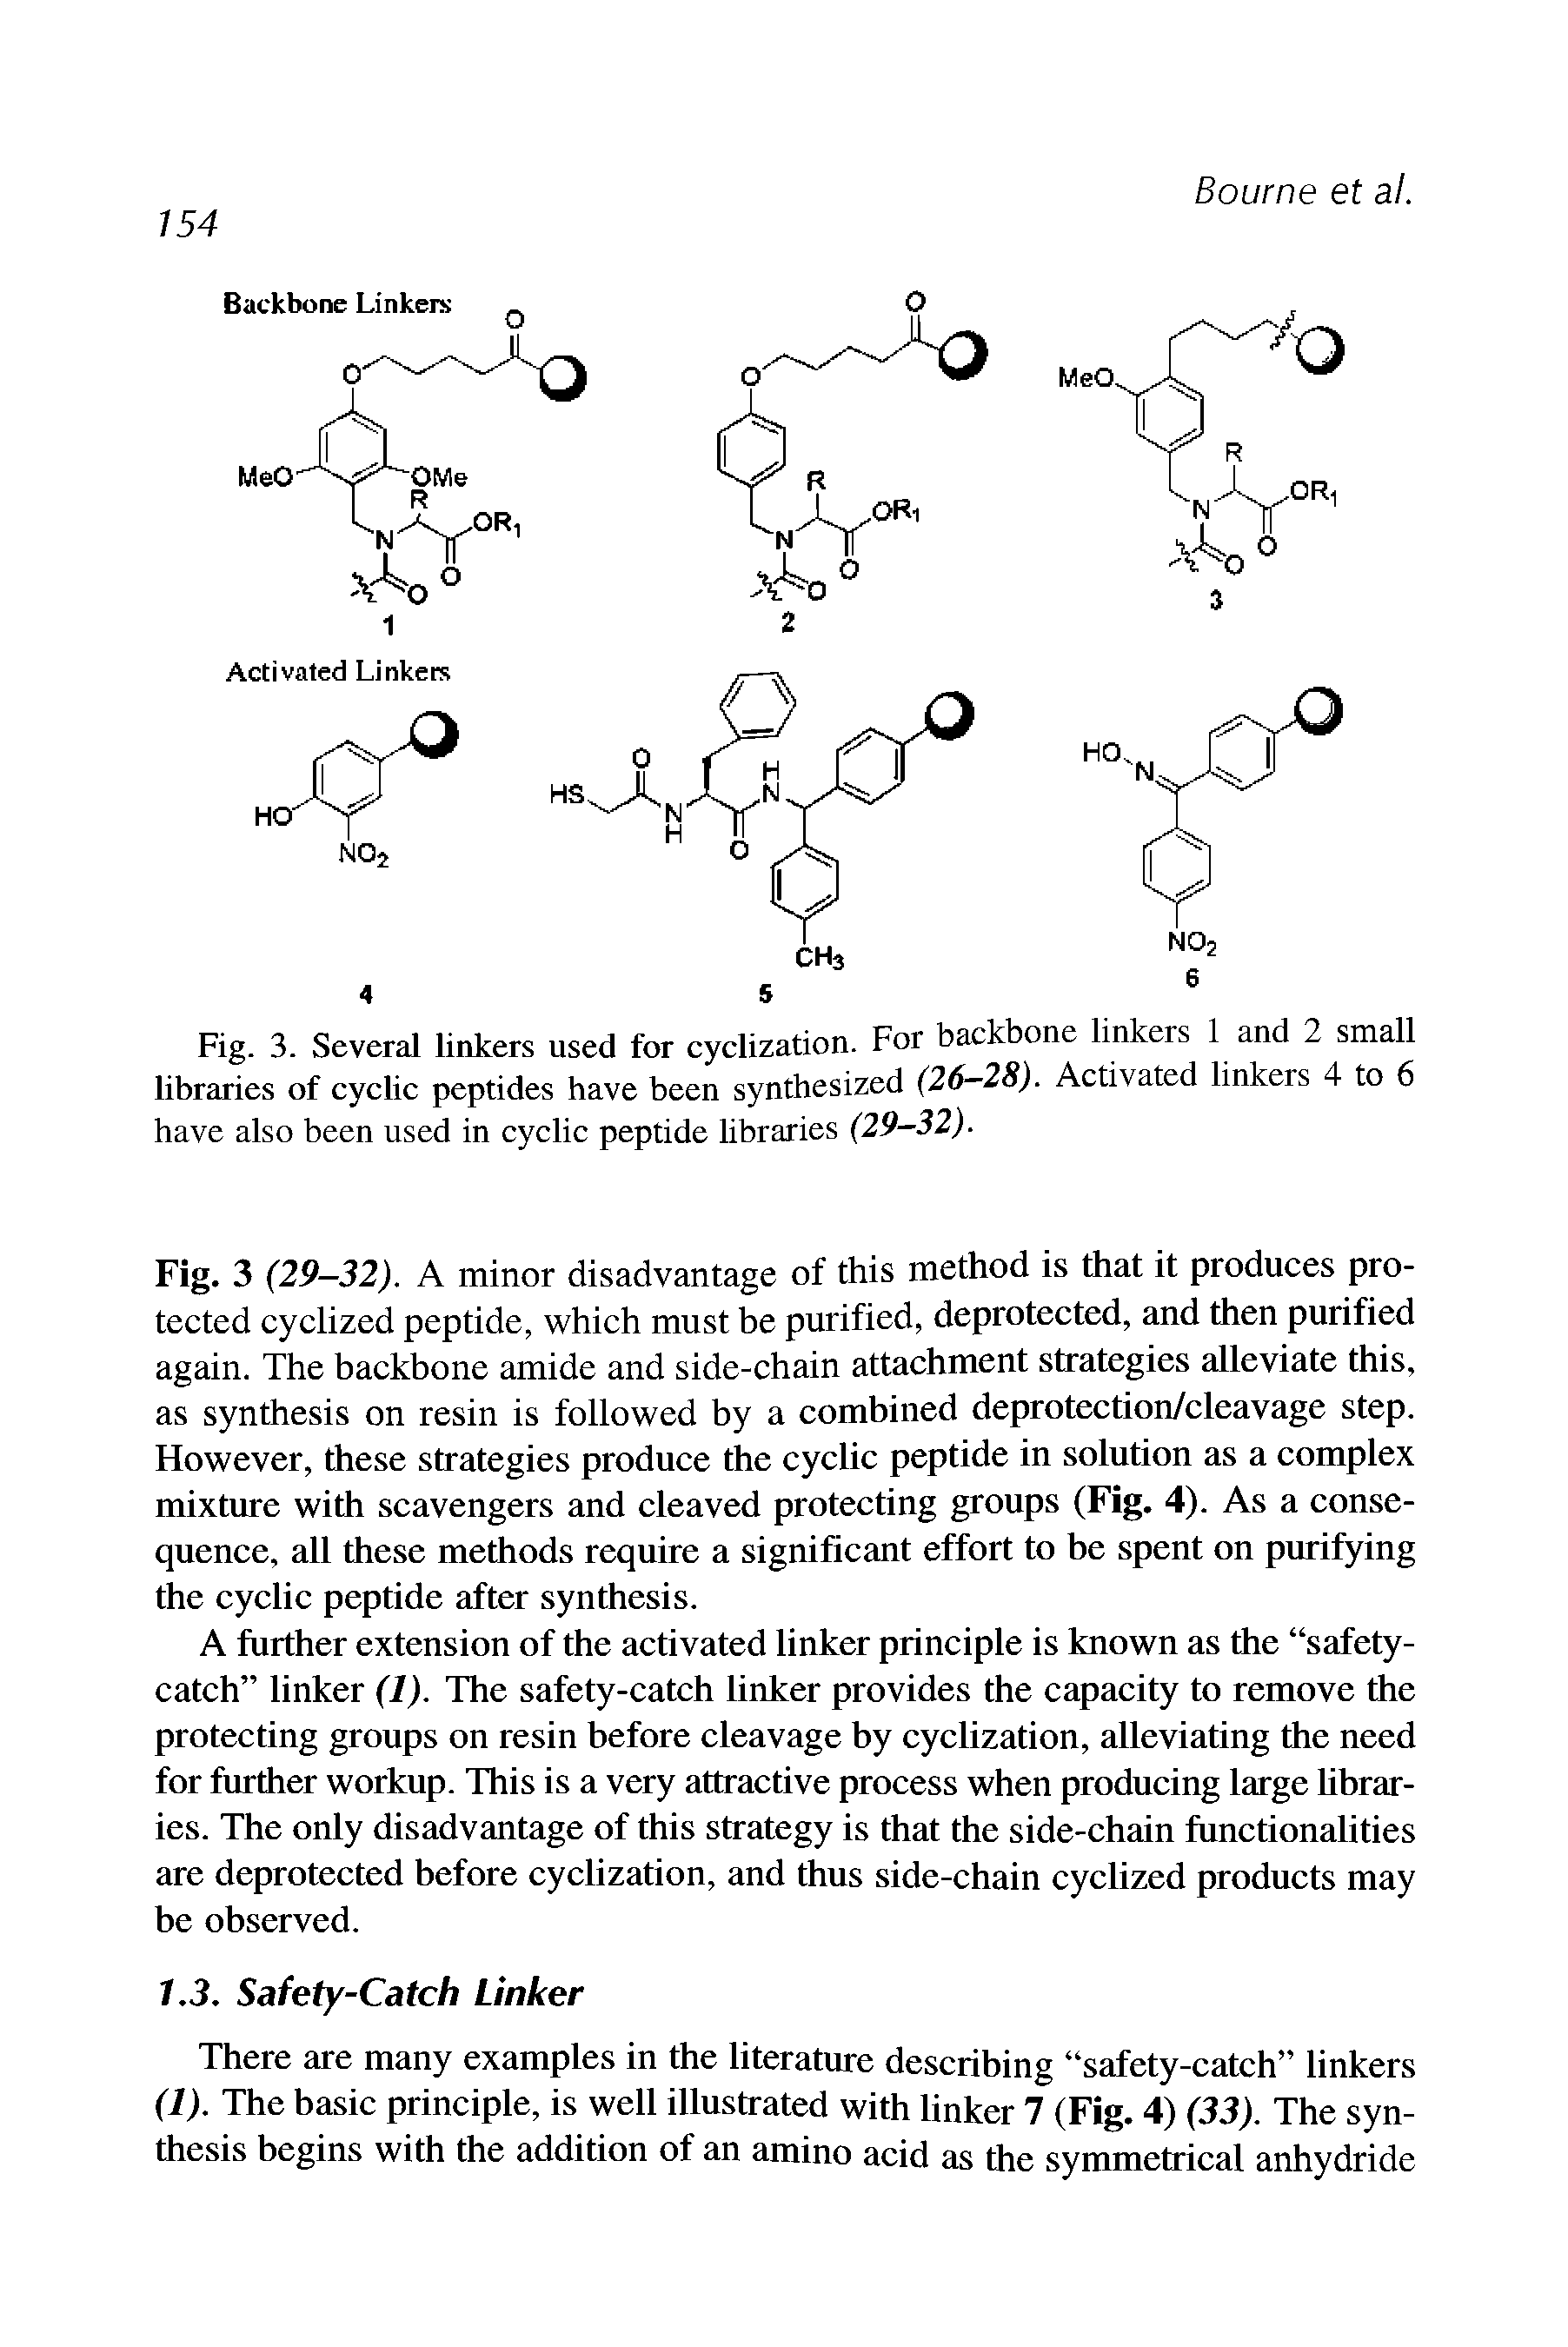 Fig. 3 (29—32). A minor disadvantage of this method is that it produces protected cyclized peptide, which must be purified, deprotected, and then purified again. The backbone amide and side-chain attachment strategies alleviate this, as synthesis on resin is followed by a combined deprotection/cleavage step. However, these strategies produce the cyclic peptide in solution as a complex mixture with scavengers and cleaved protecting groups (Fig, 4). As a consequence, all these methods require a significant effort to be spent on purifying the cyclic peptide after synthesis.